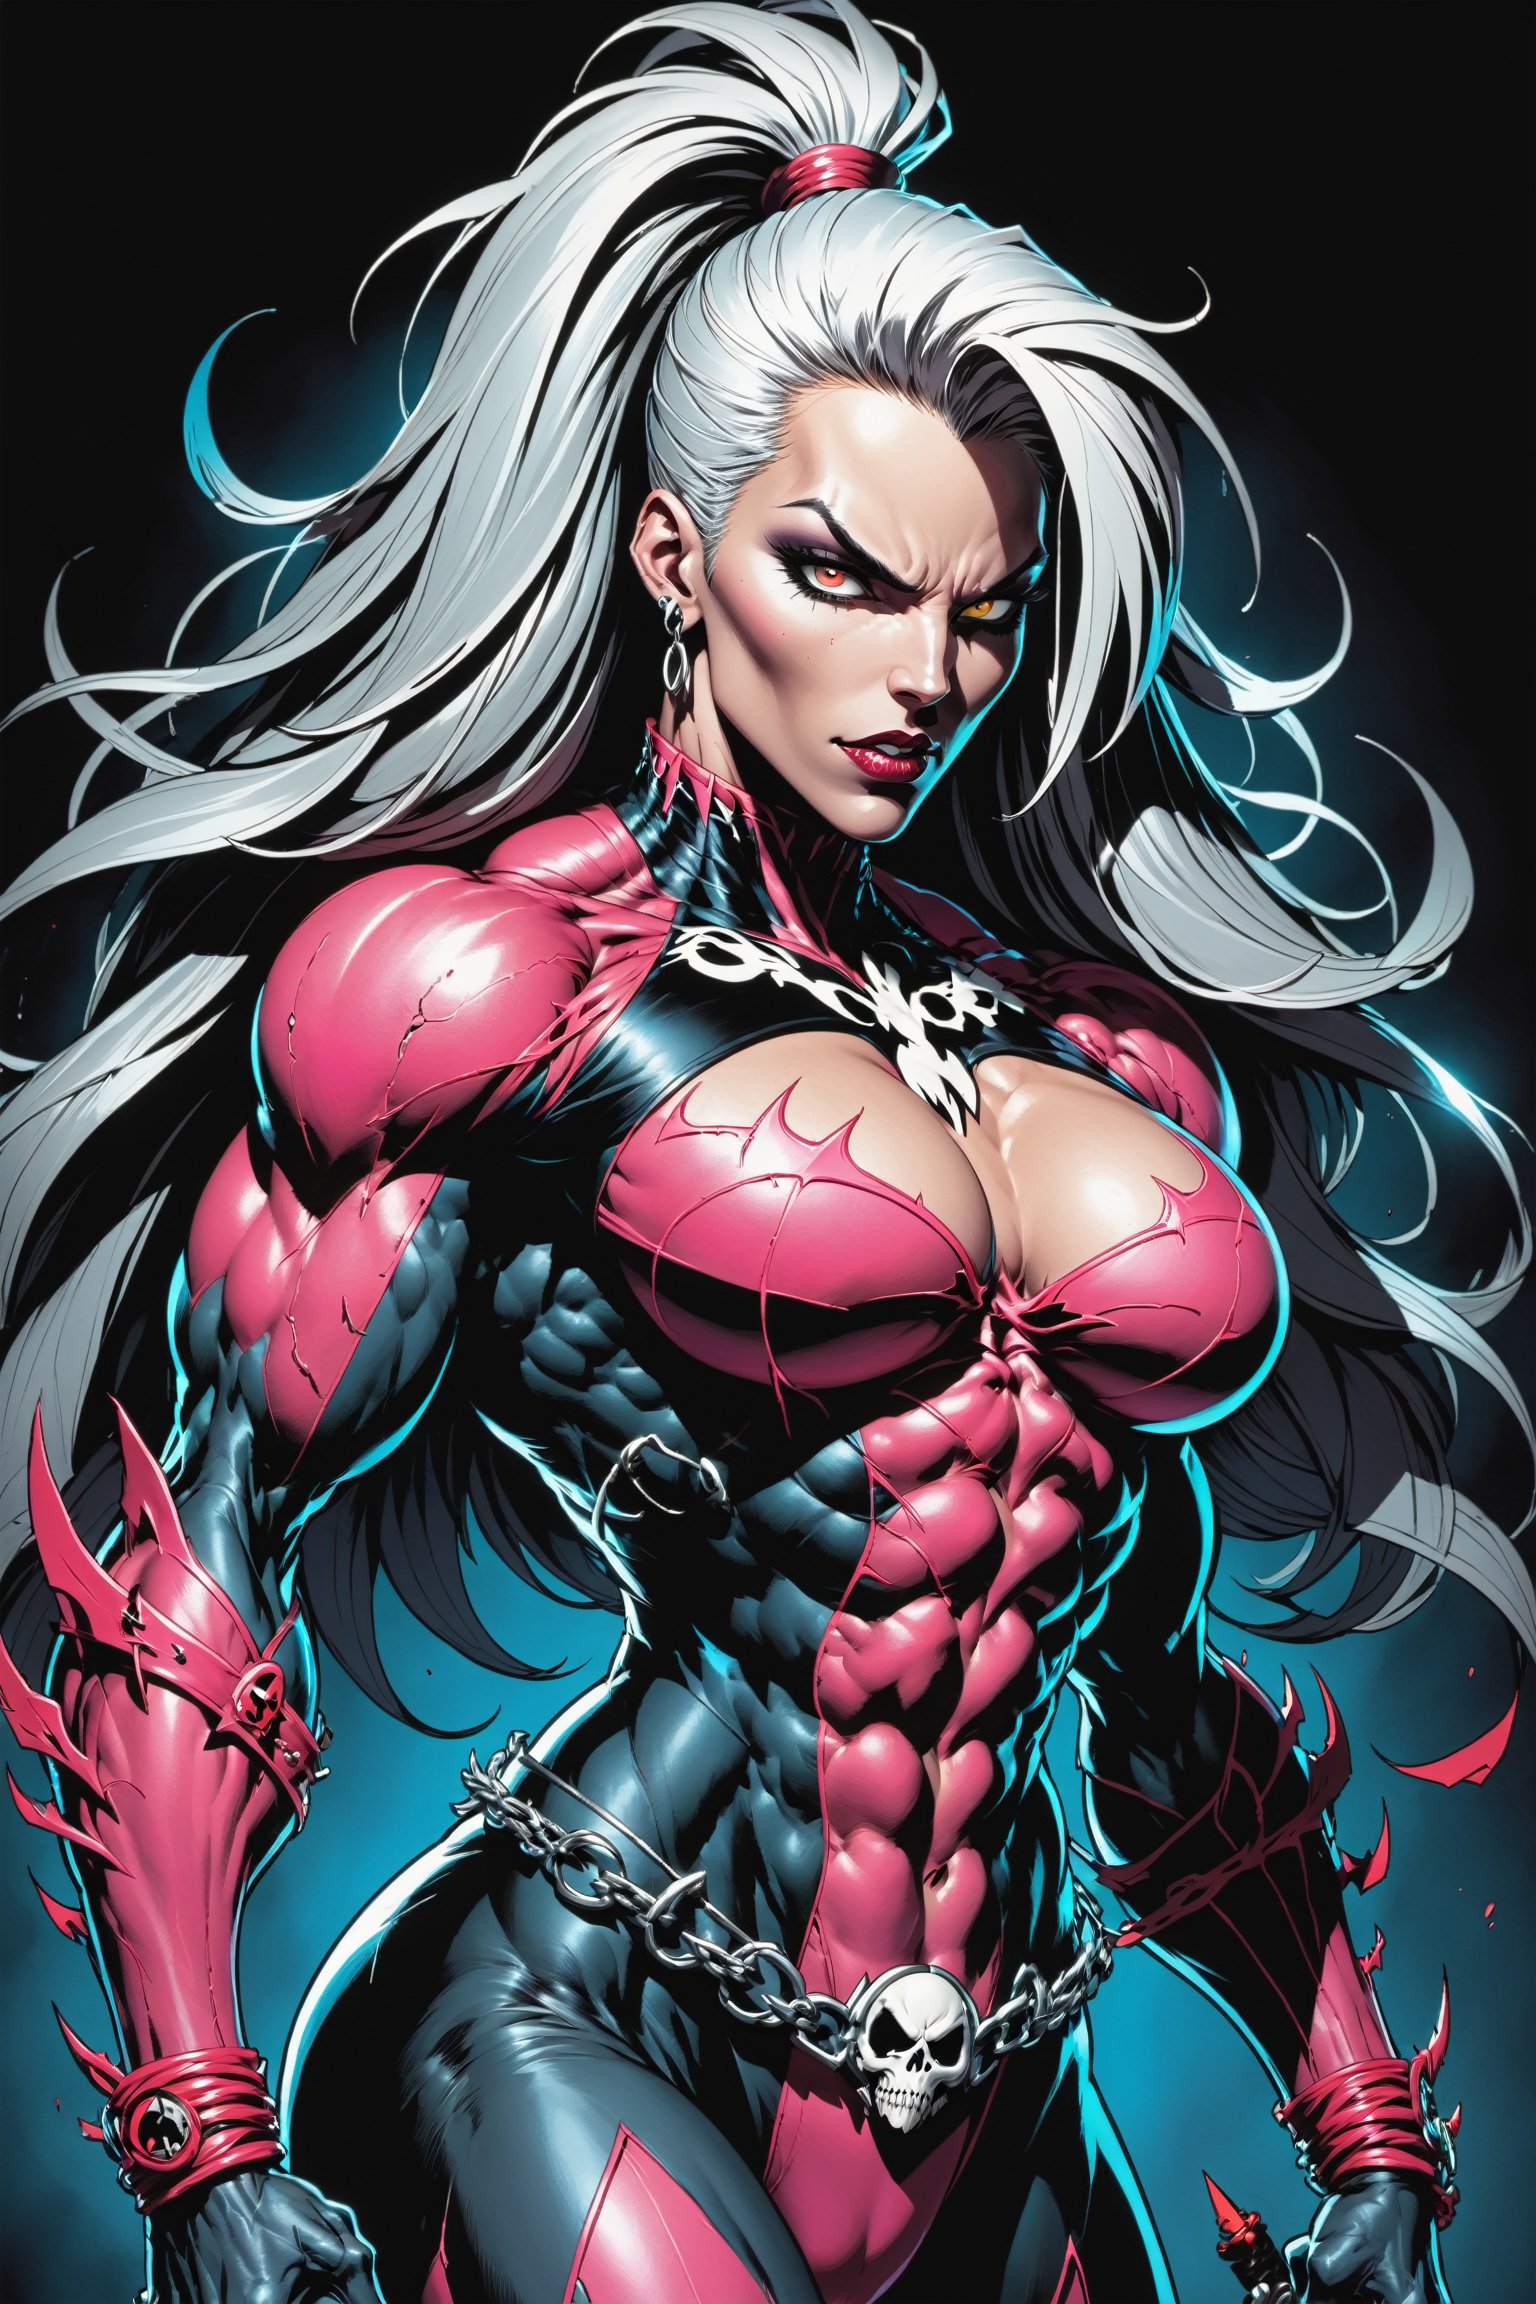 midshot, cel-shading style, centered image, ultra detailed illustration of the comic character ((female Spawn warrior woman, by Todd McFarlane)), posing, extremely muscular overly muscular large breast extremely extremely muscular, black, neon pink, suit with a belt with a skull on it, long white hair in a tall, single ponytail, ((Half Body)), perfect hands, (tetradic colors), inkpunk, ink lines, strong outlines, art by MSchiffer, bold traces, unframed, high contrast, cel-shaded, vector, 4k resolution, best quality, (chromatic aberration:1.8)